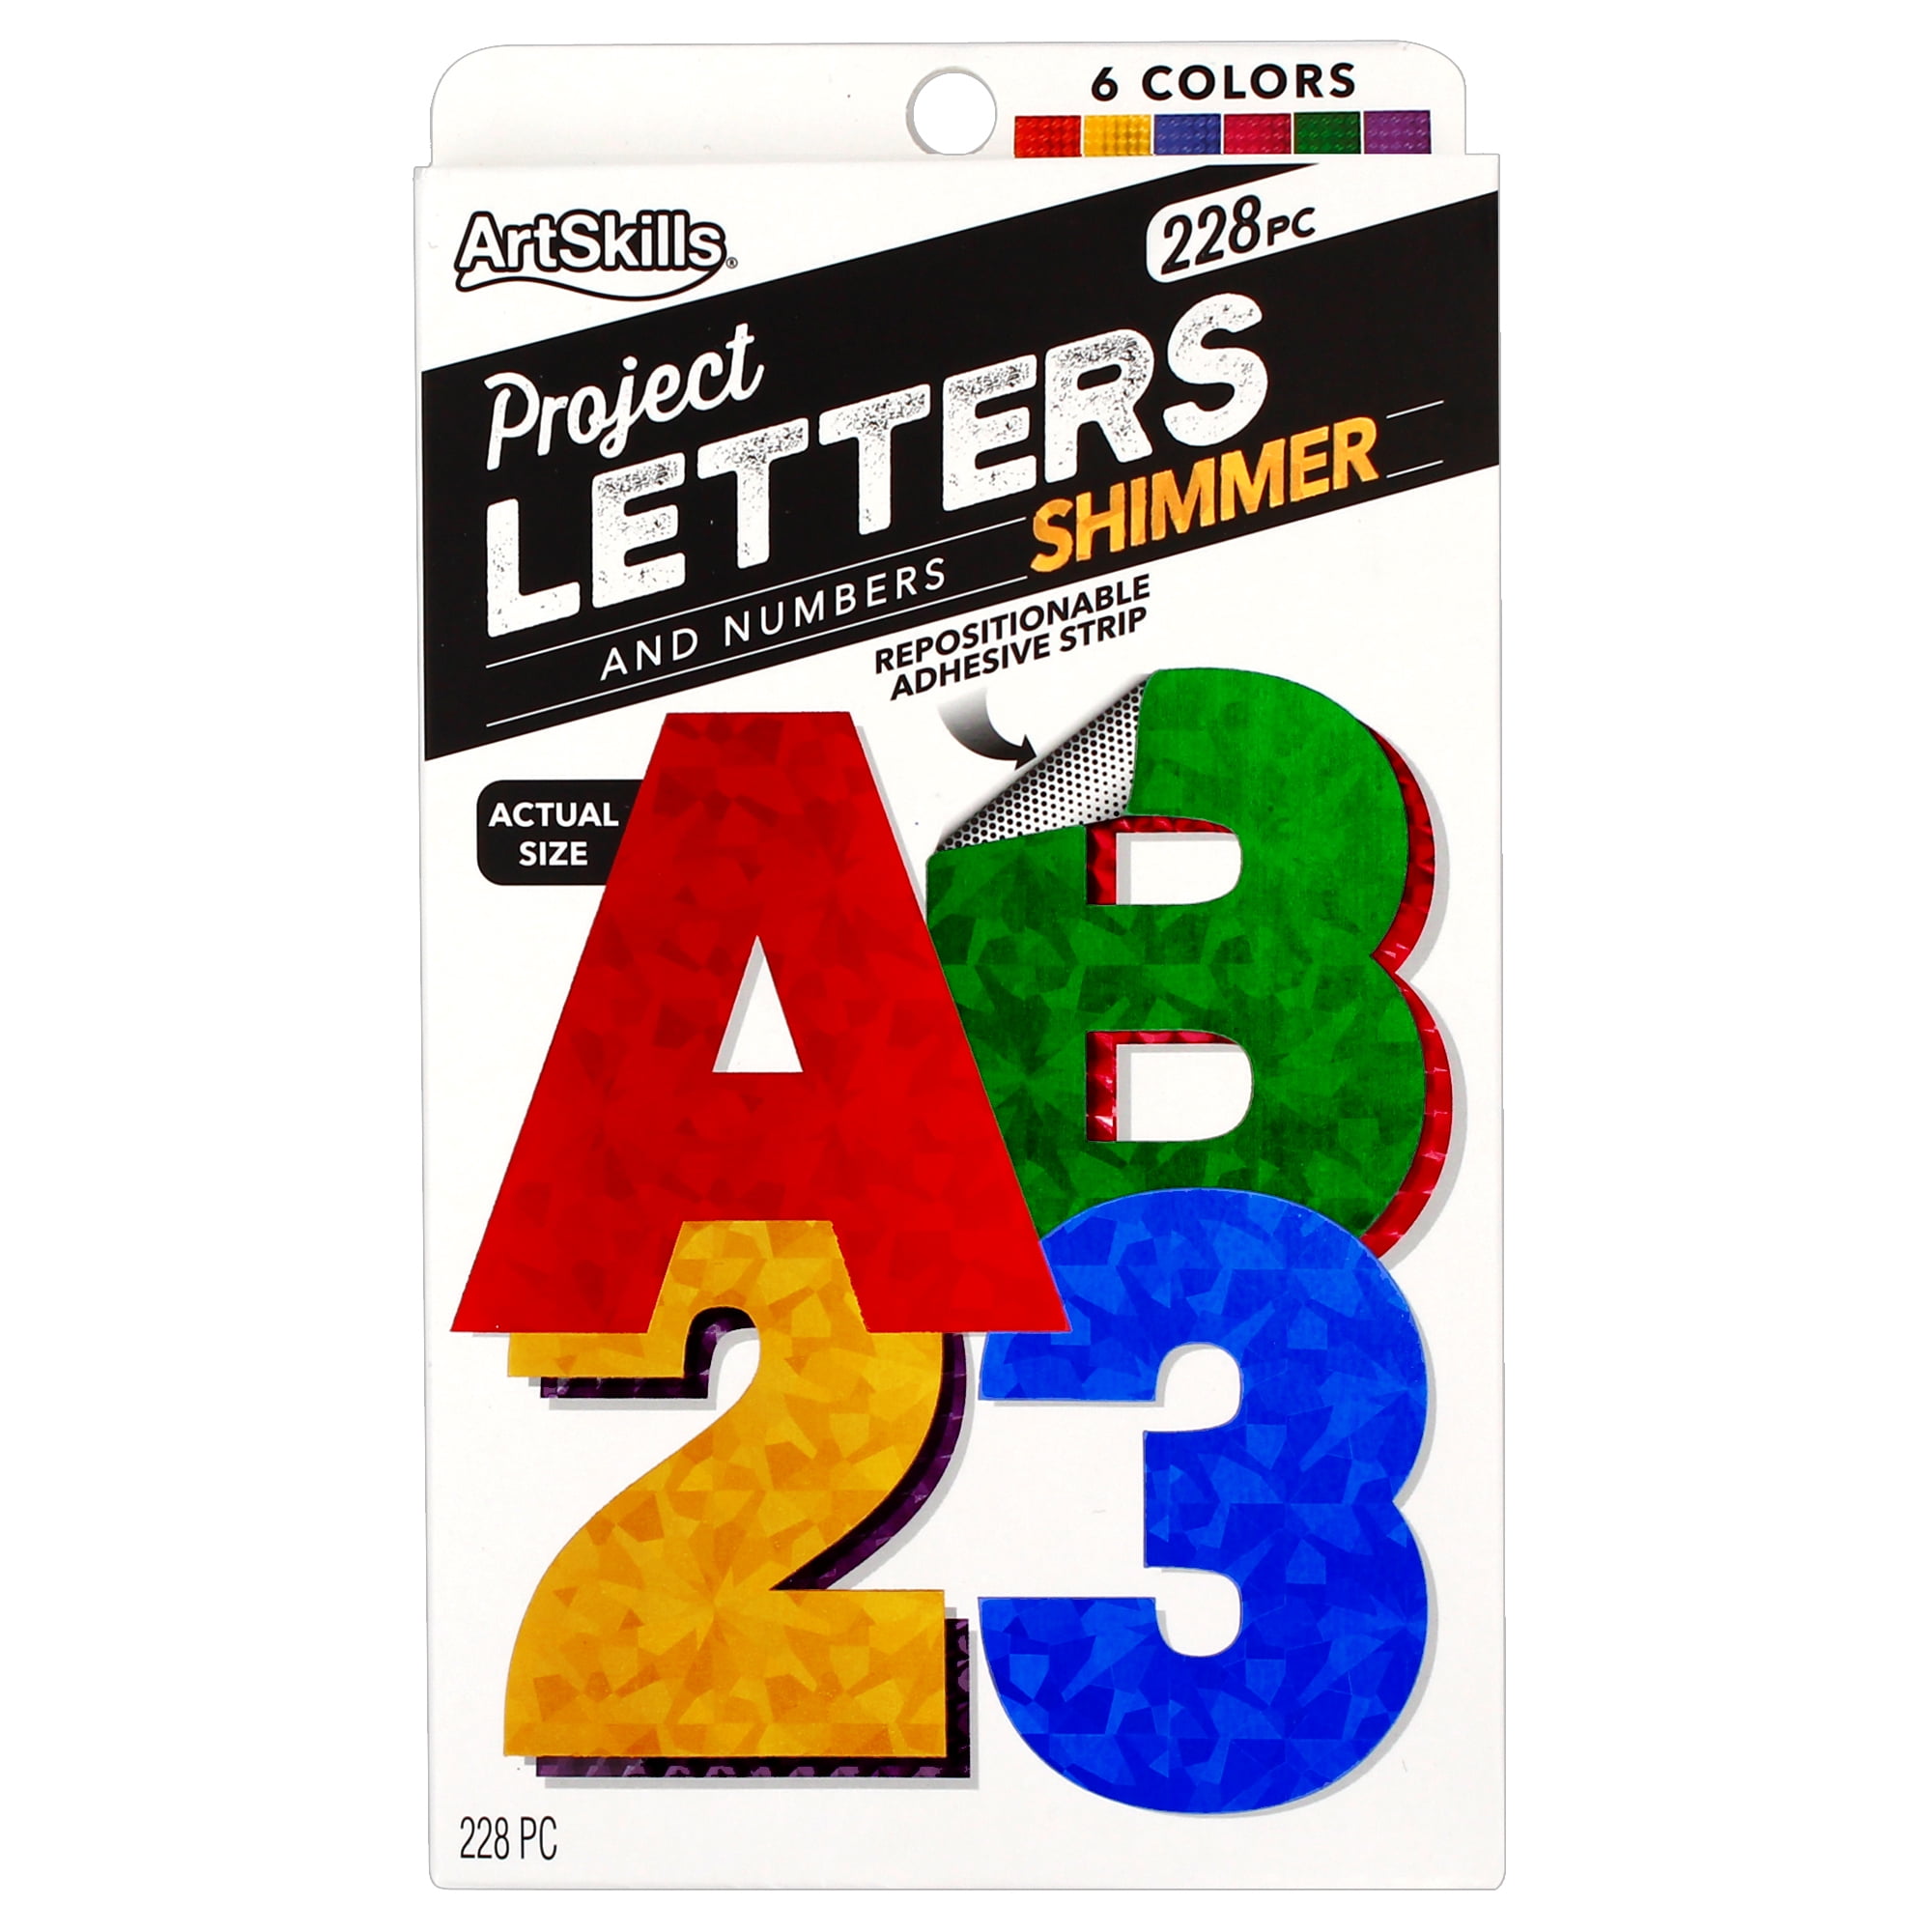 ArtSkills 2.5" Holographic Paper Letters and Numbers for School and Office Projects, 228Pc